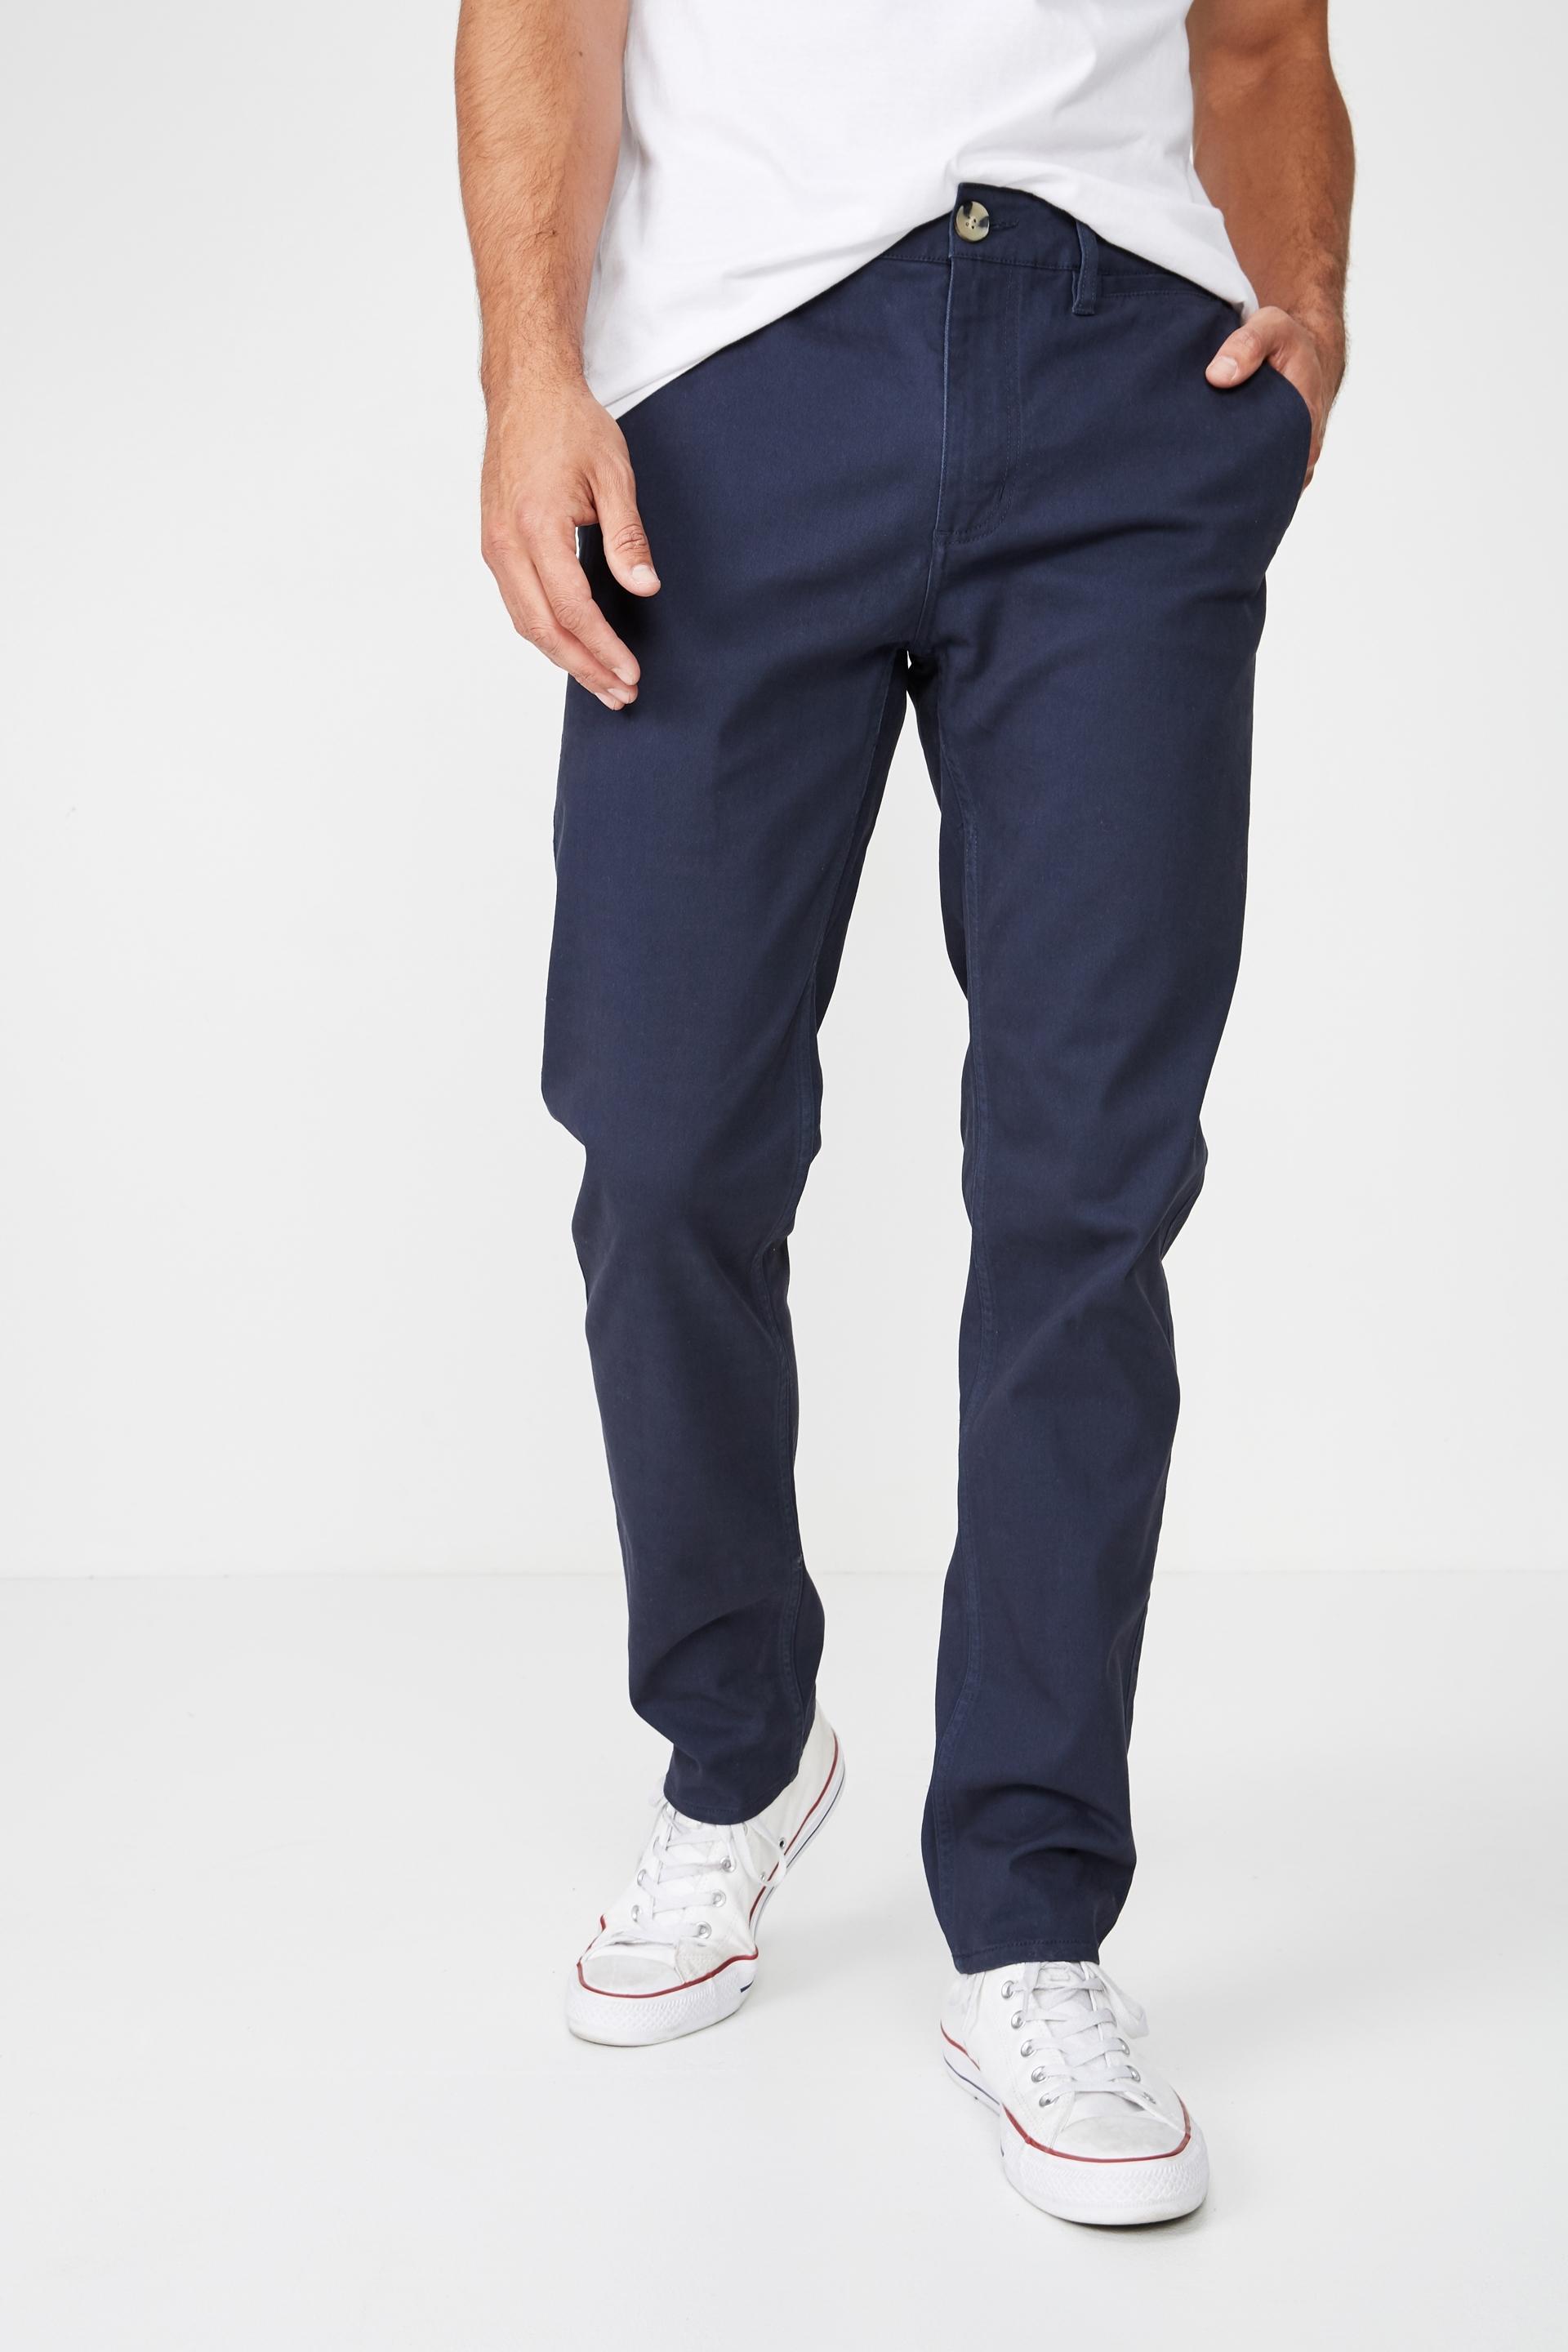 Knox chino pant- old navy Cotton On Pants & Chinos | Superbalist.com